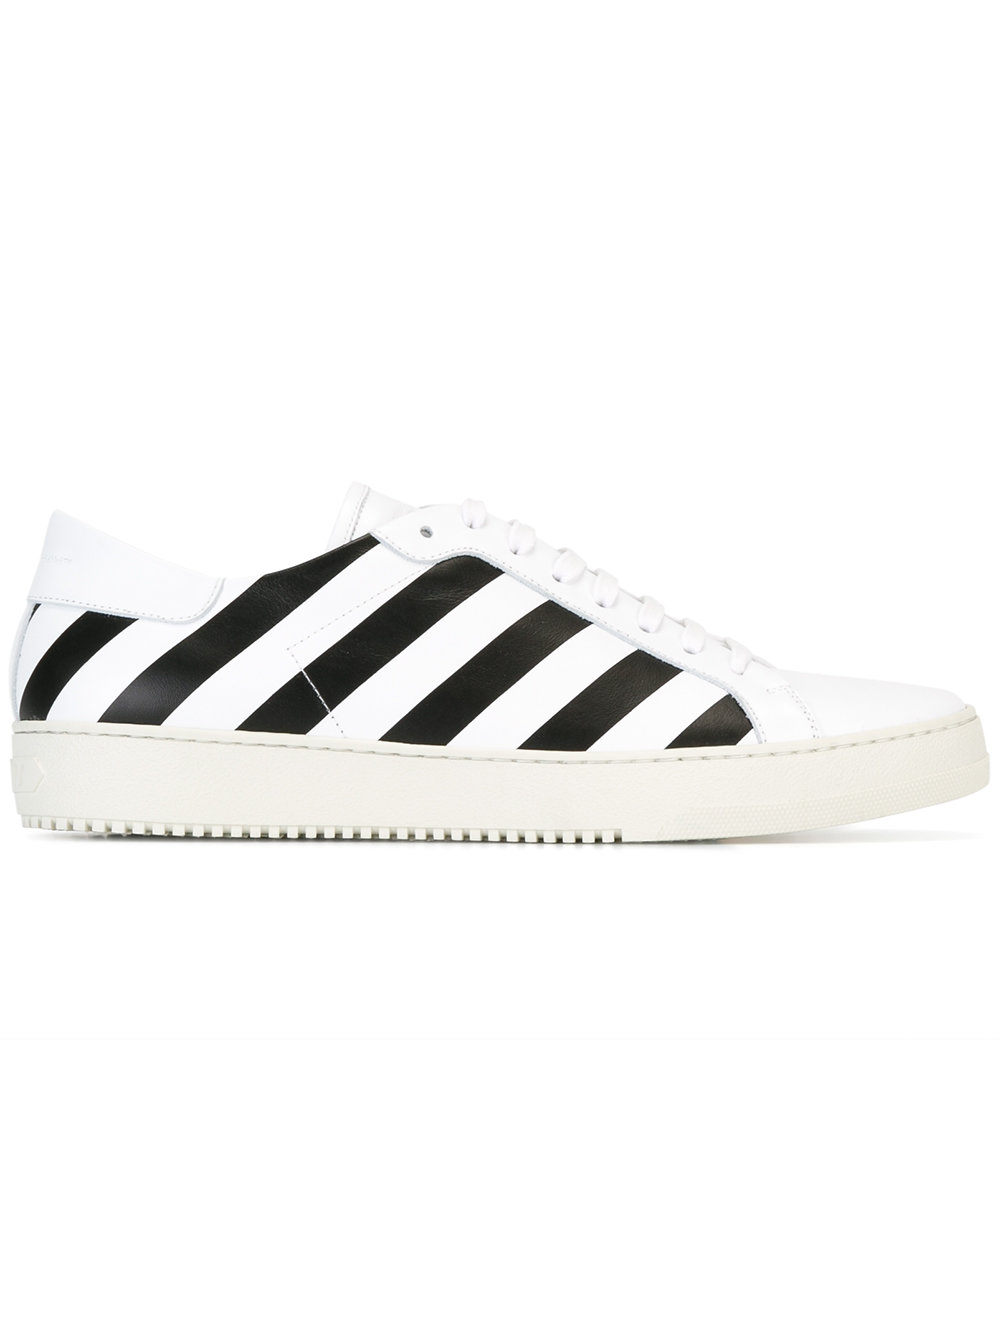 Off-White Classic Diagonals sneakers WHITE Men Shoes Trainers